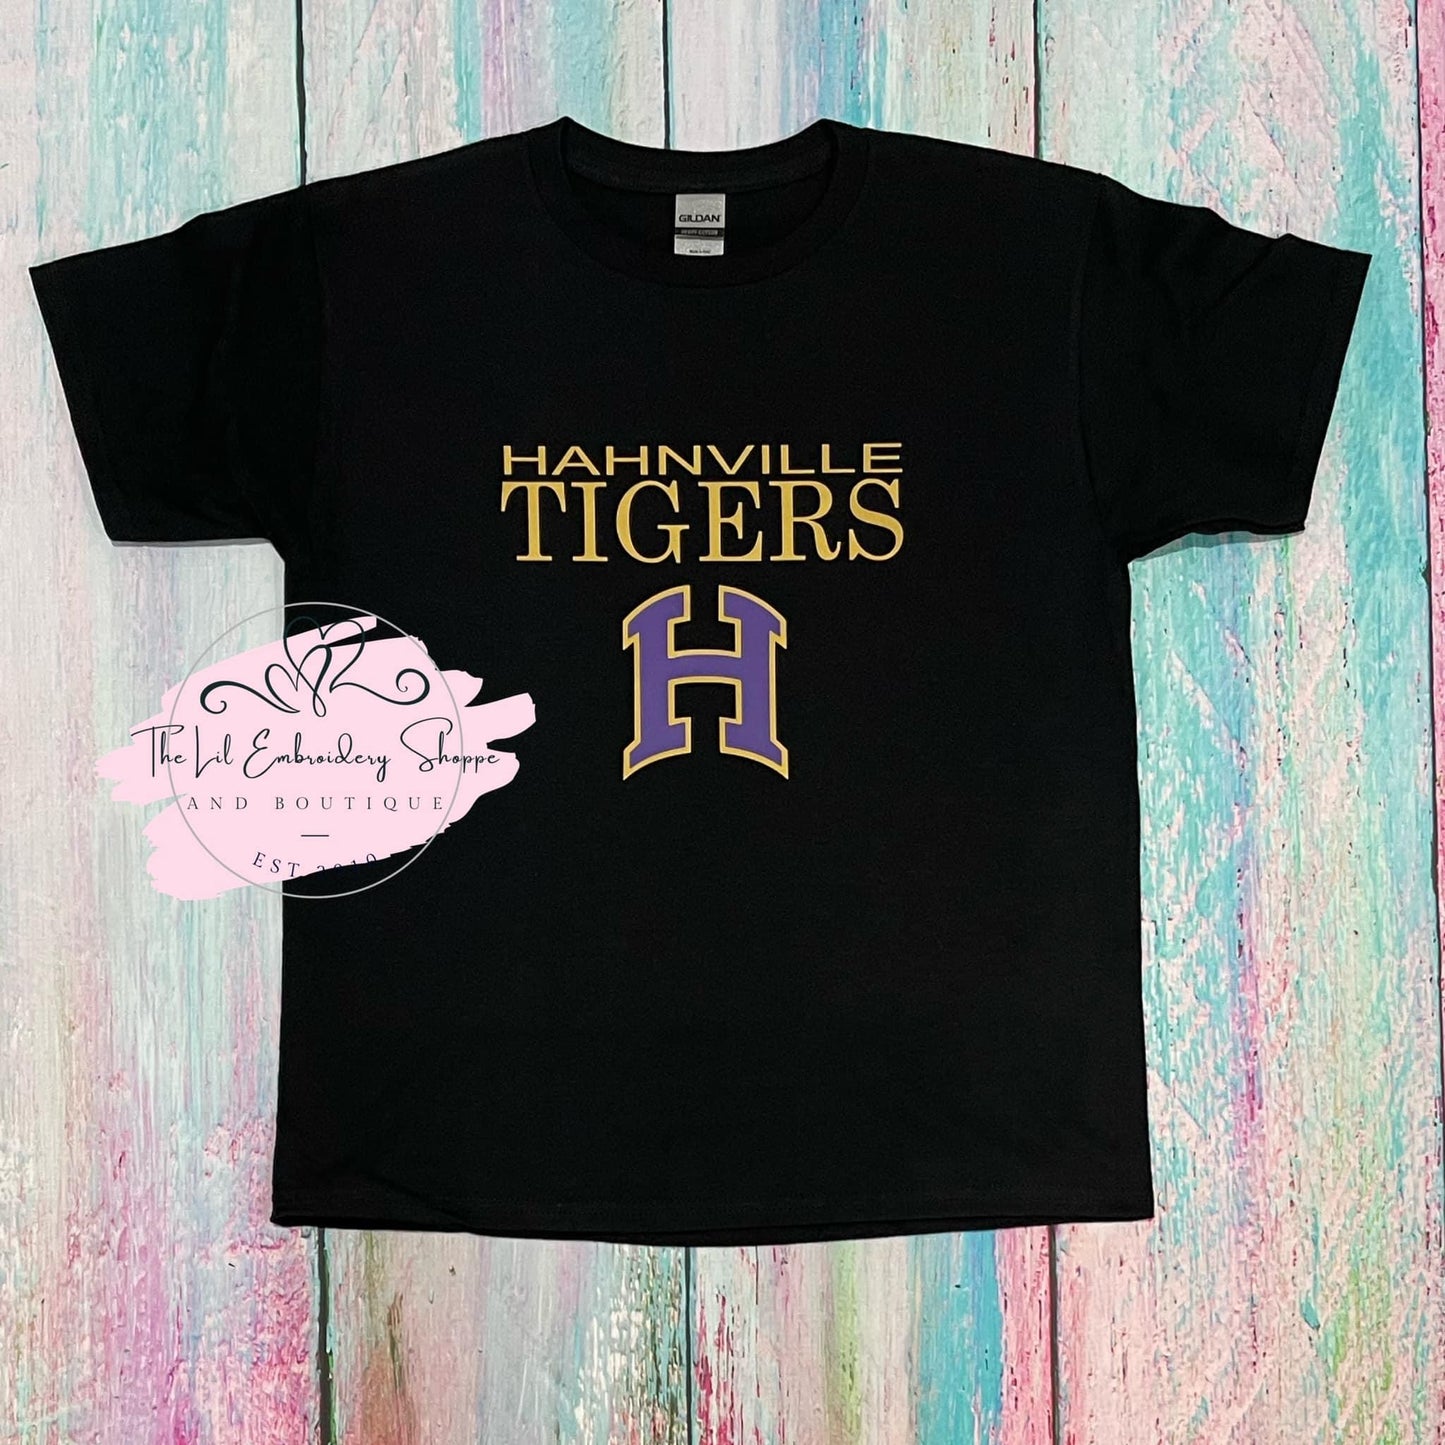 HAHNVILLE TIGERS ‘H’ T-SHIRT